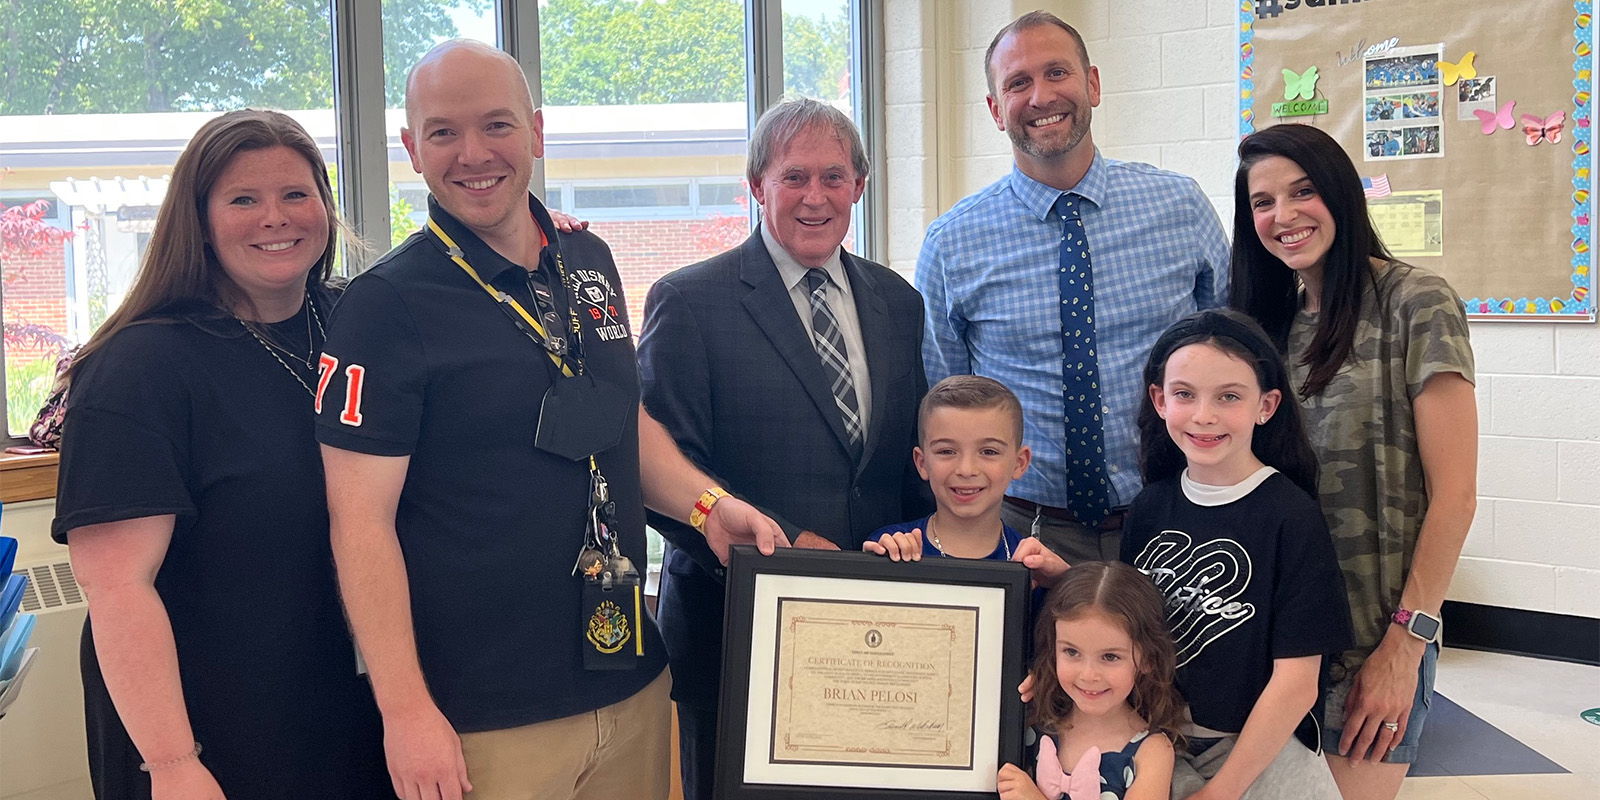 Mr. Pelosi Honored By Town Of Smithtown